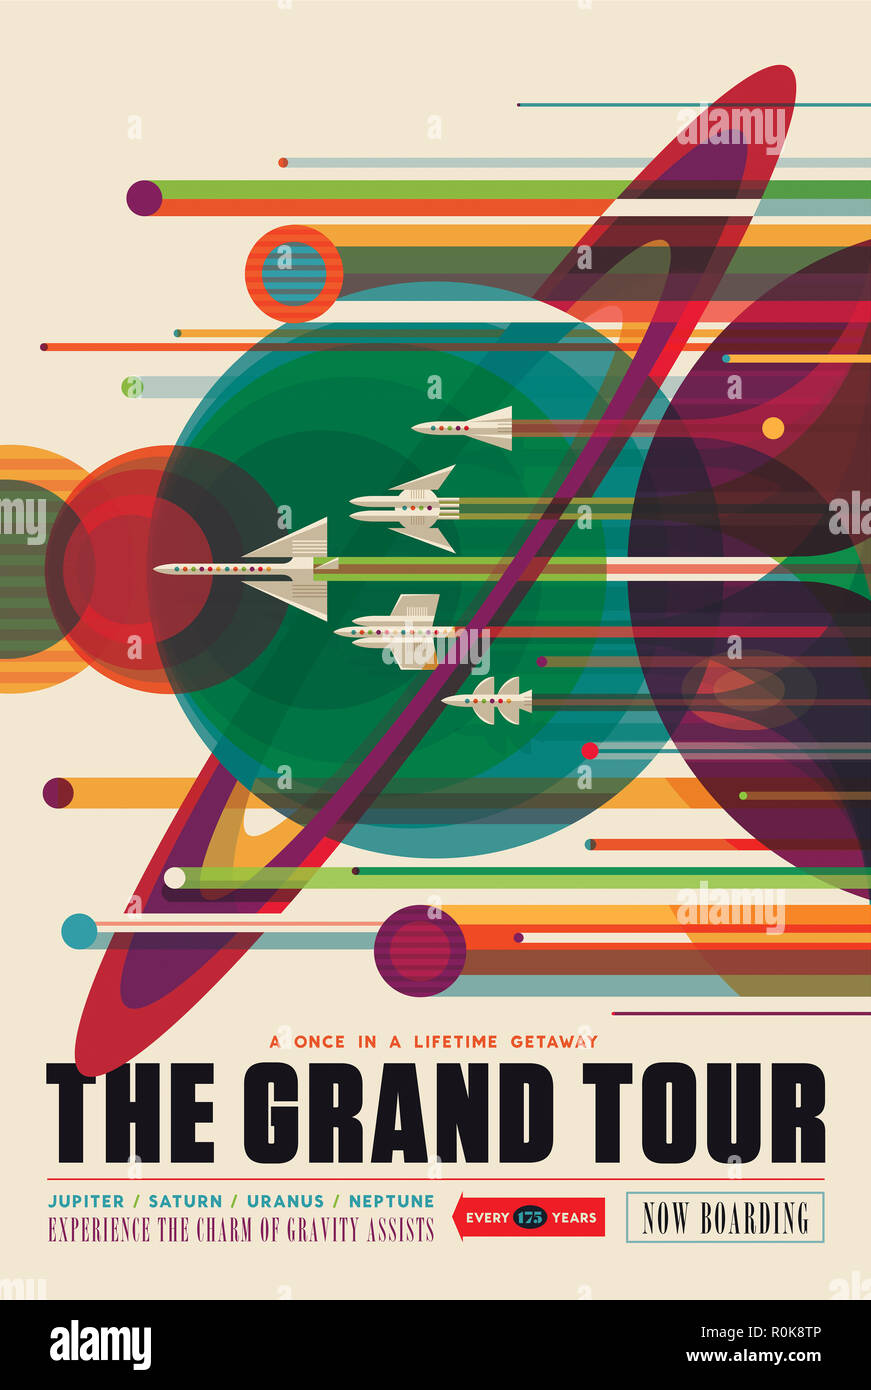 Retro space travel poster of a solar system grand tour aboard the Voyager spacecraft. Stock Photo